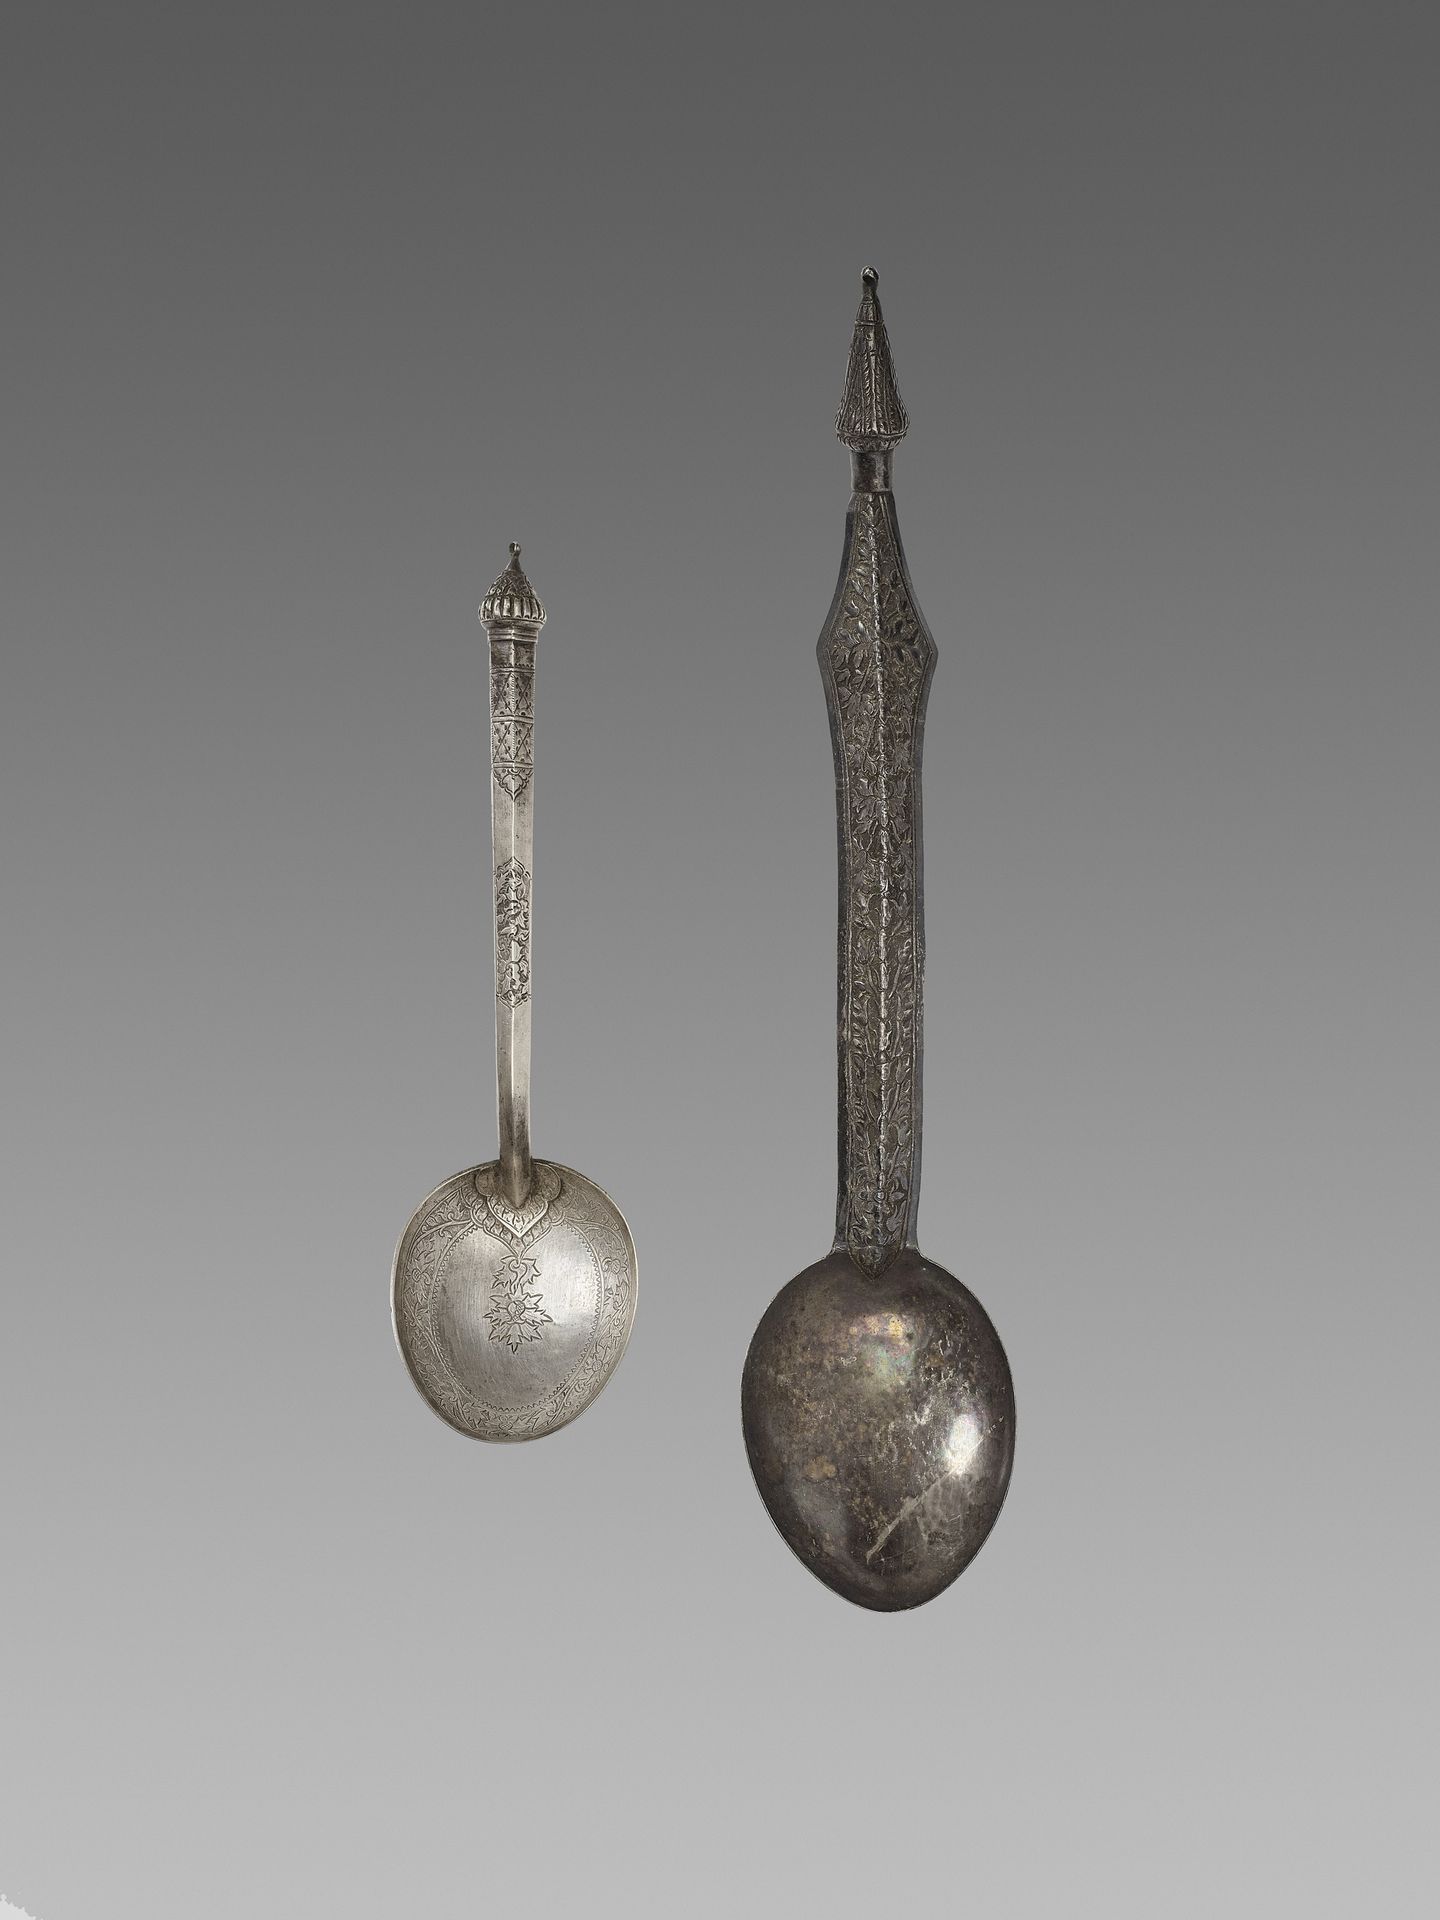 TWO LARGE CAMBODIAN SILVER SPOONS DEUX GRANDES CUILLÈRES EN ARGENT CAMBODGIENNES&hellip;